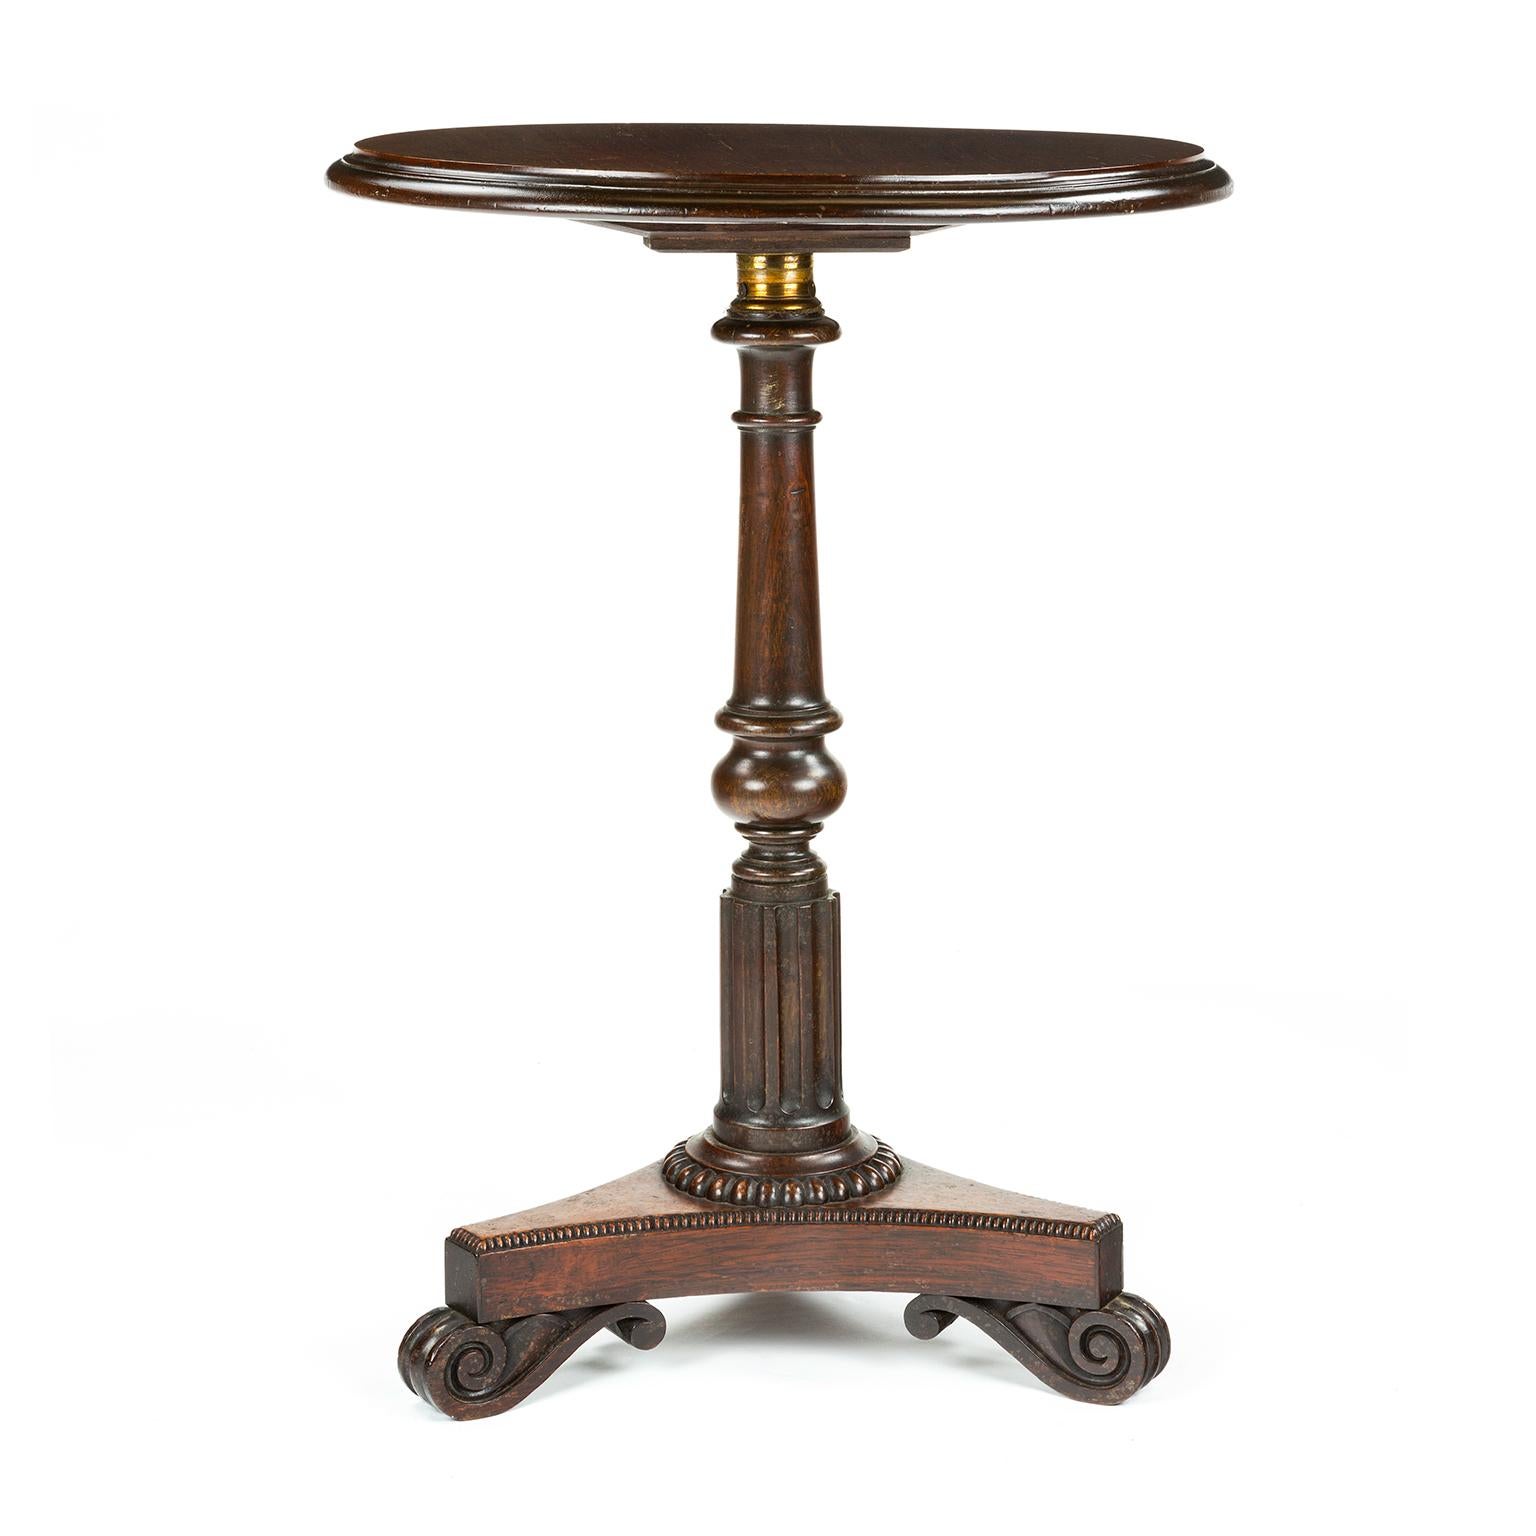 British Accredited to Gillows a William IV Rosewood Wine Table